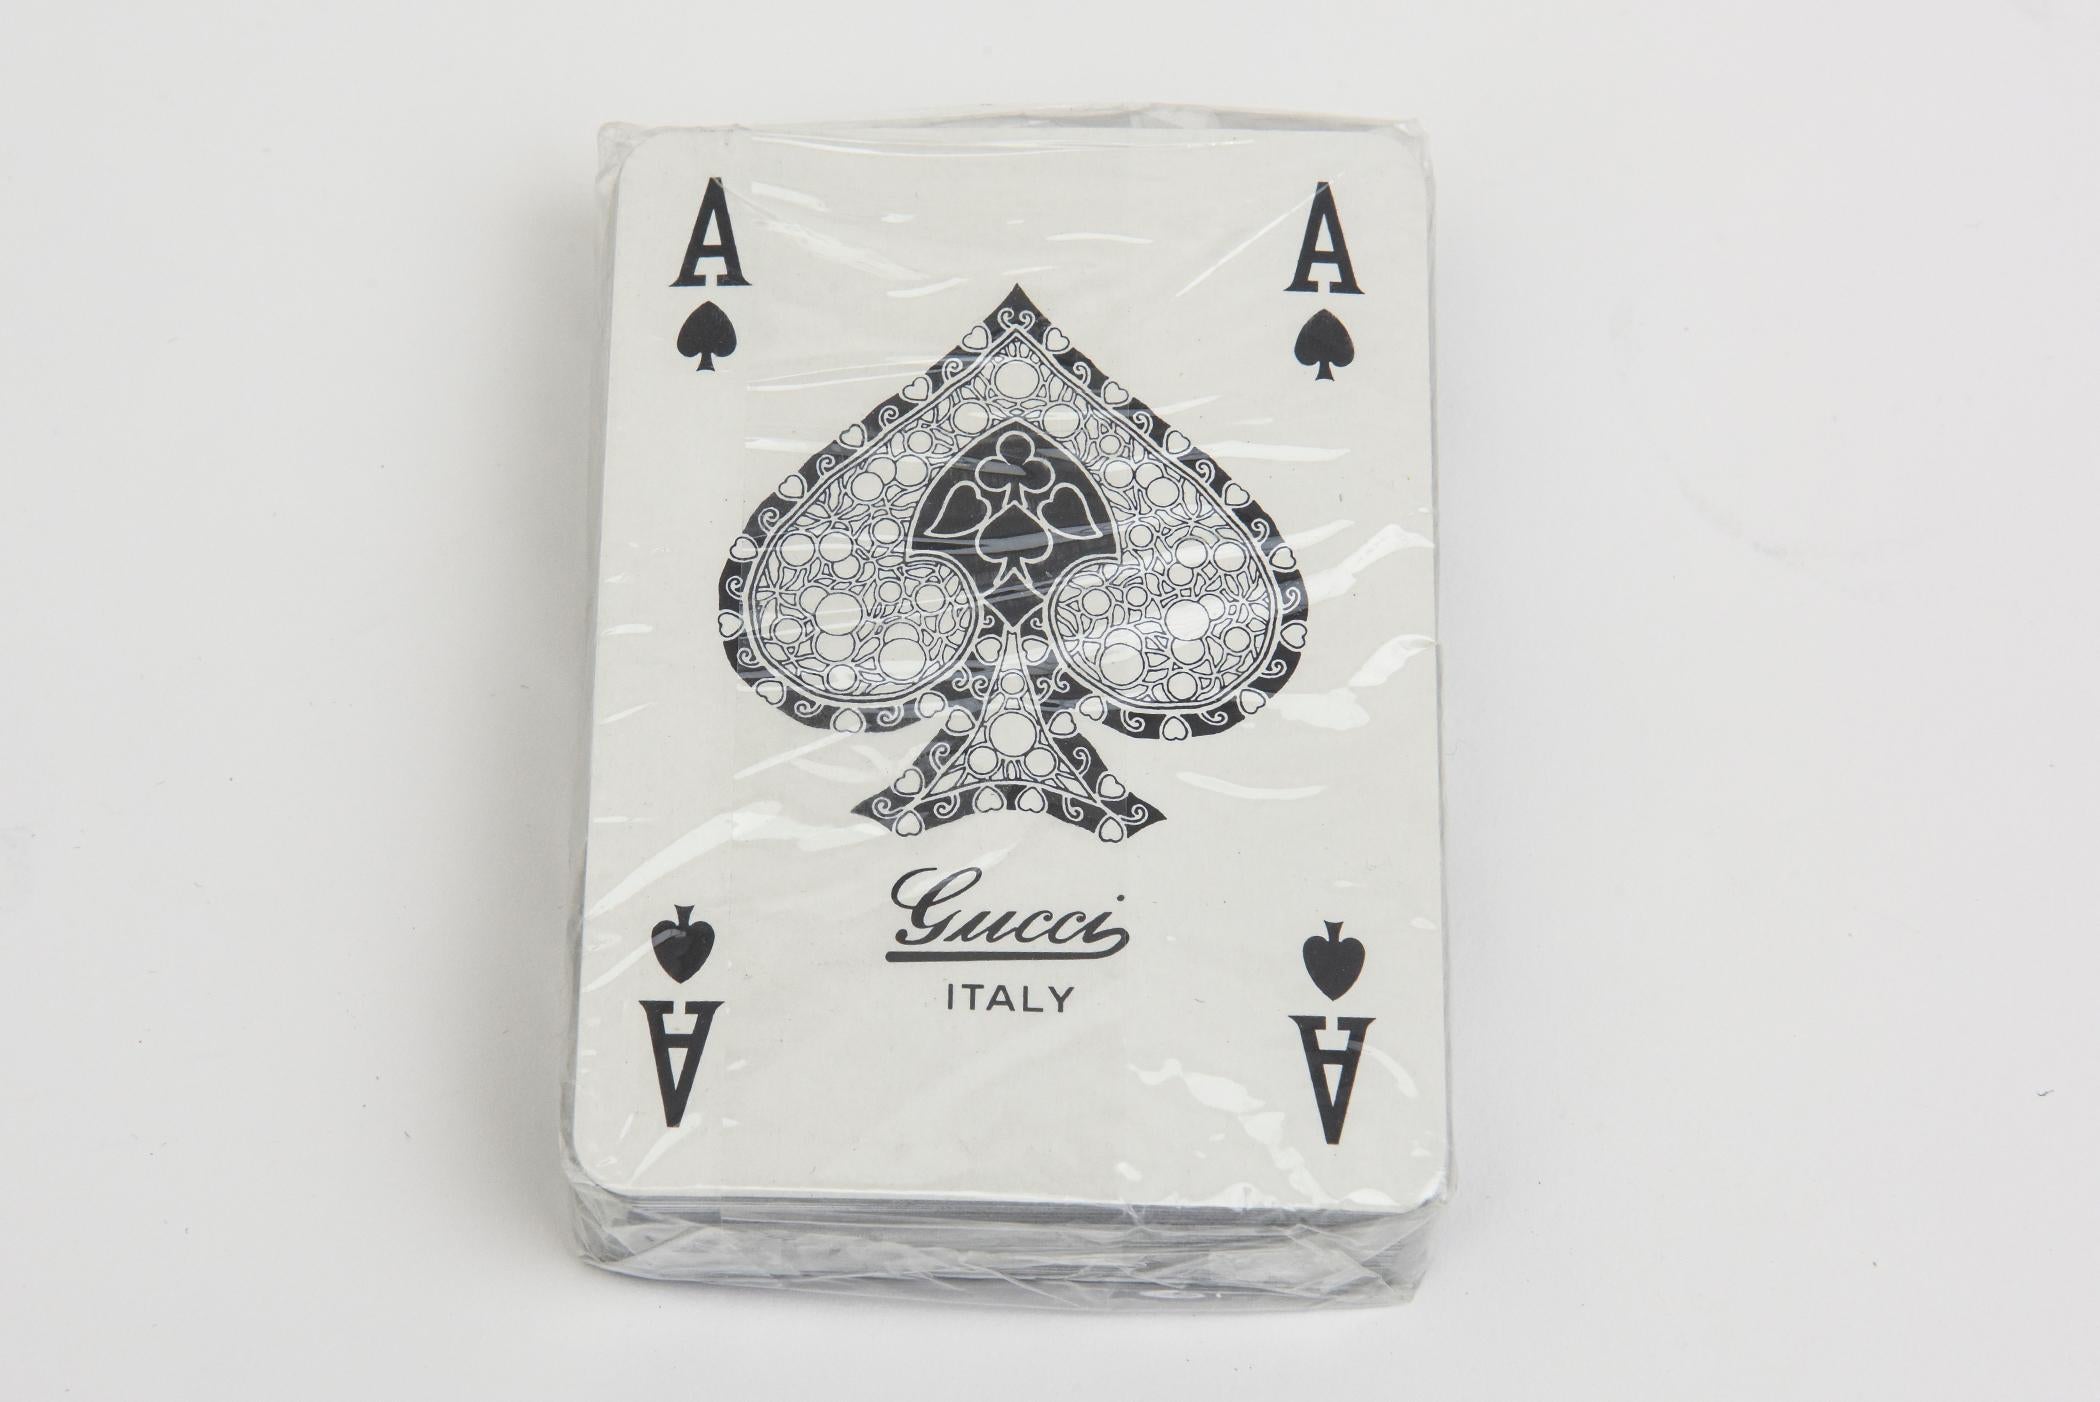 This never used boxed set of logo Gucci playing cards is vintage and Italian from the 1970s. It is 2 sets one in white and black for the back. One was unwrapped as how we purchased it and the other is still in cellophane. It comes in its original